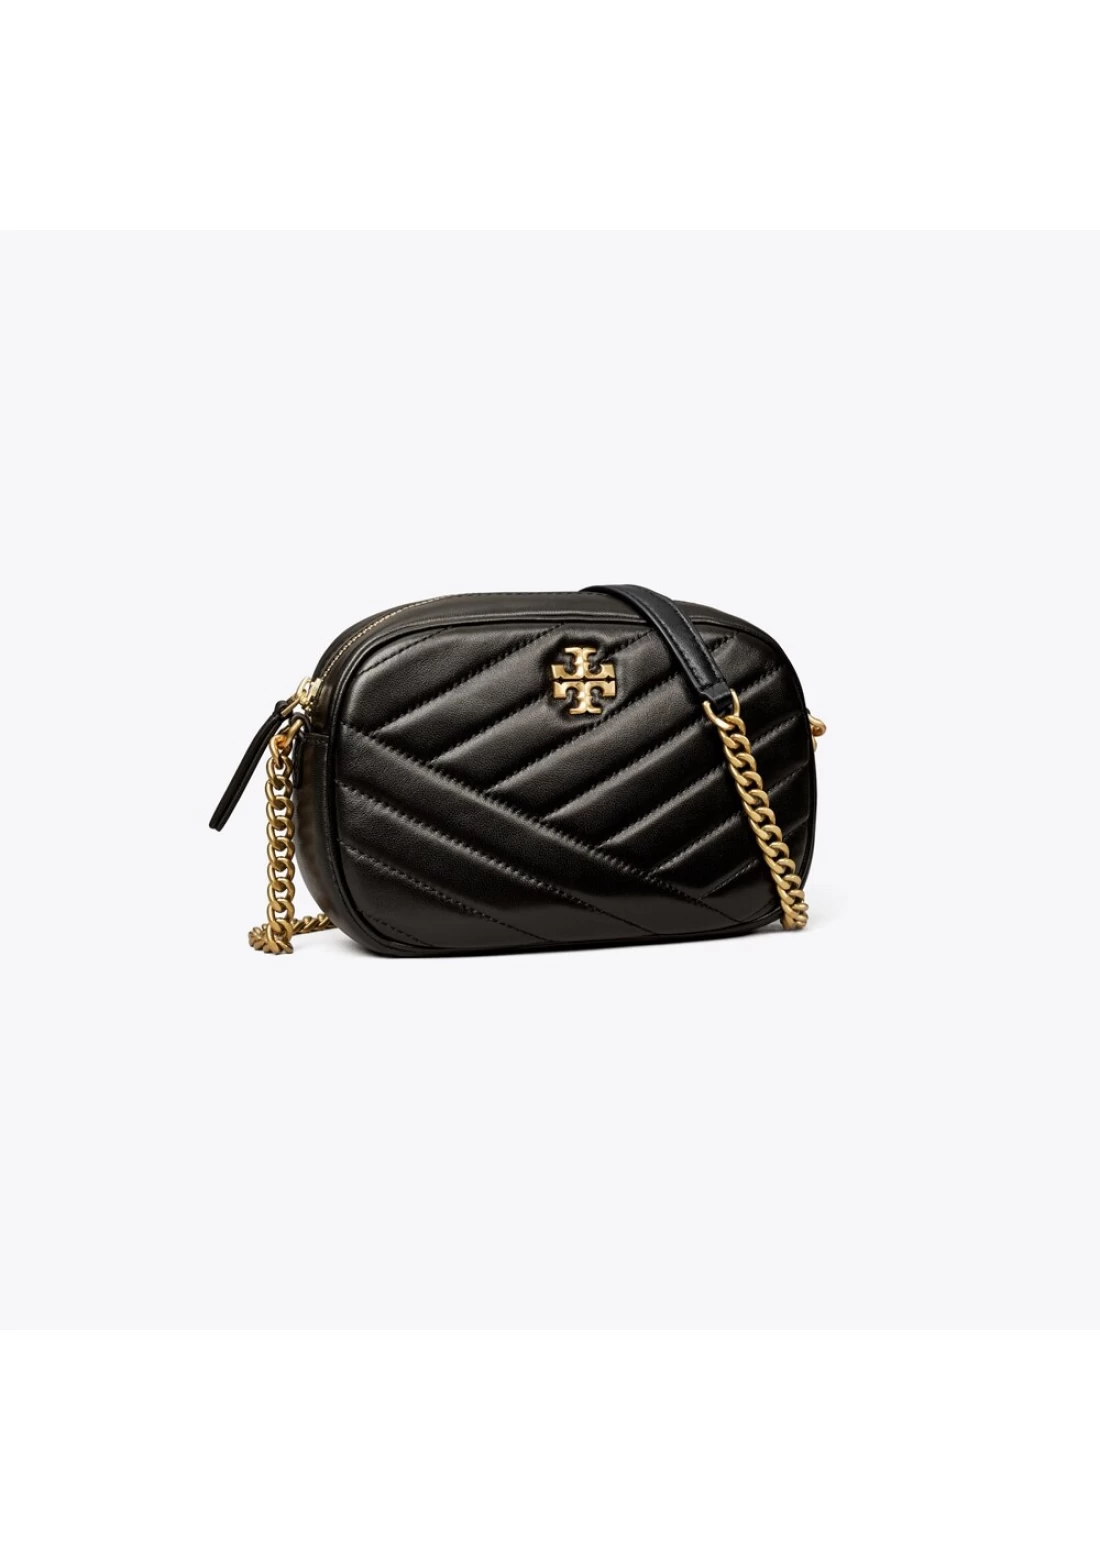 All About The Tory Burch Small Kira Convertible Shoulder Bag - Mod